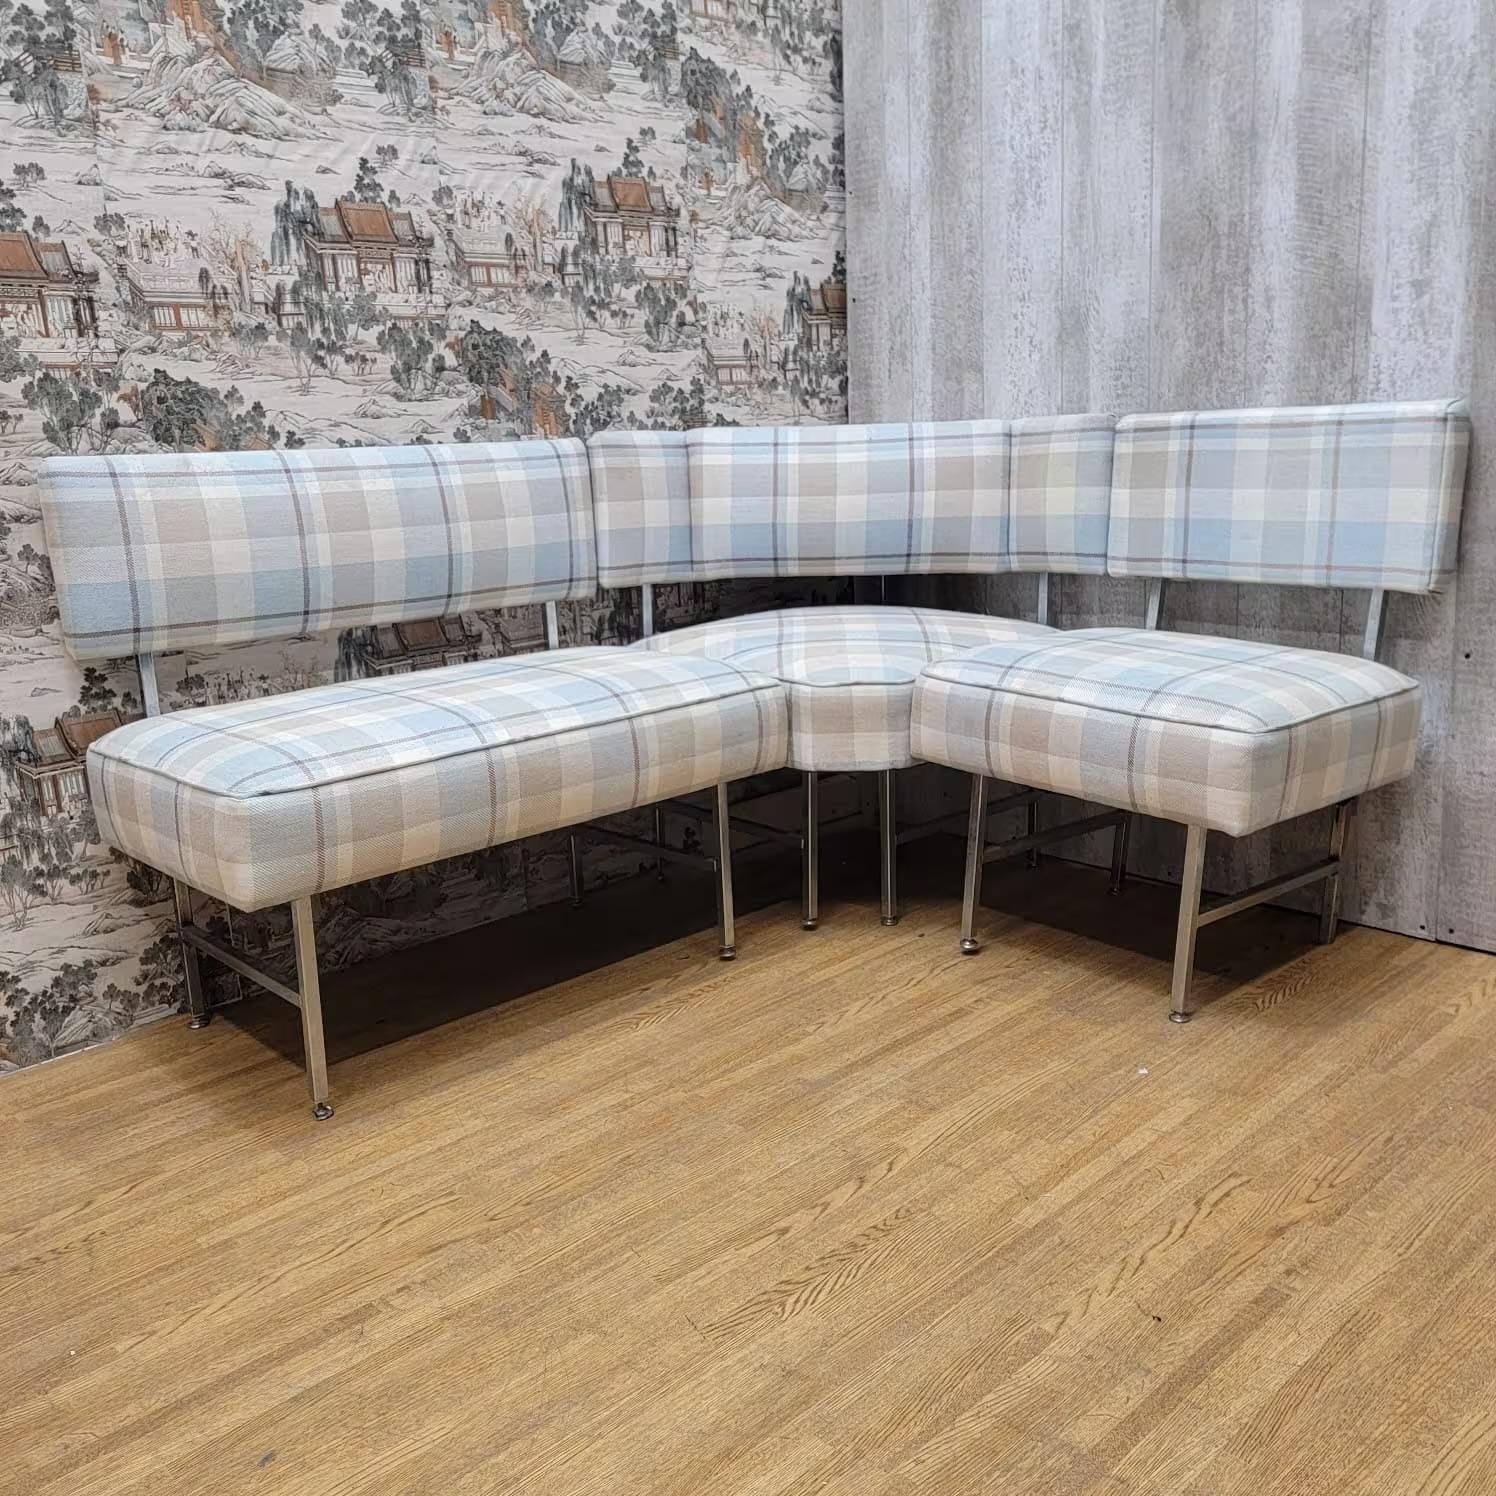 Vintage Modern Corner Dining Banquette in Plaid Fabric 

The Vintage Modern Corner Dining Banquette in Plaid Fabric is a chic and versatile piece of furniture that combines the classic appeal of vintage design with a modern touch. This wrap-around